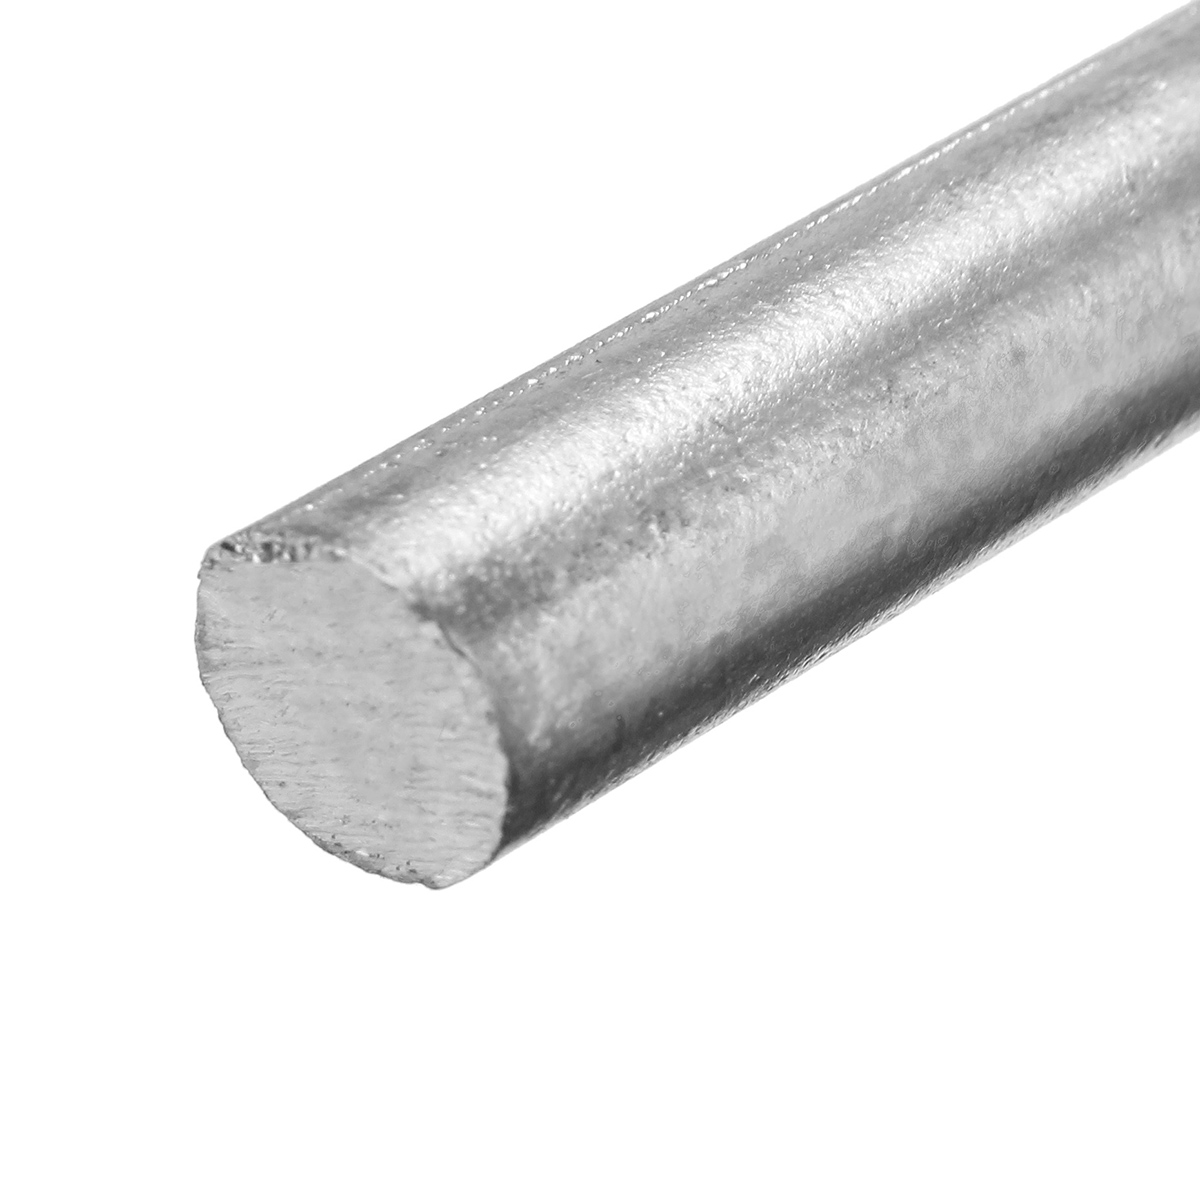 04-inch-x-4-inch-High-Purity-Zn-9995-Zinc-Metal-Rod-Anode-Electroplating-Solid-Round-Bar-1396373-7